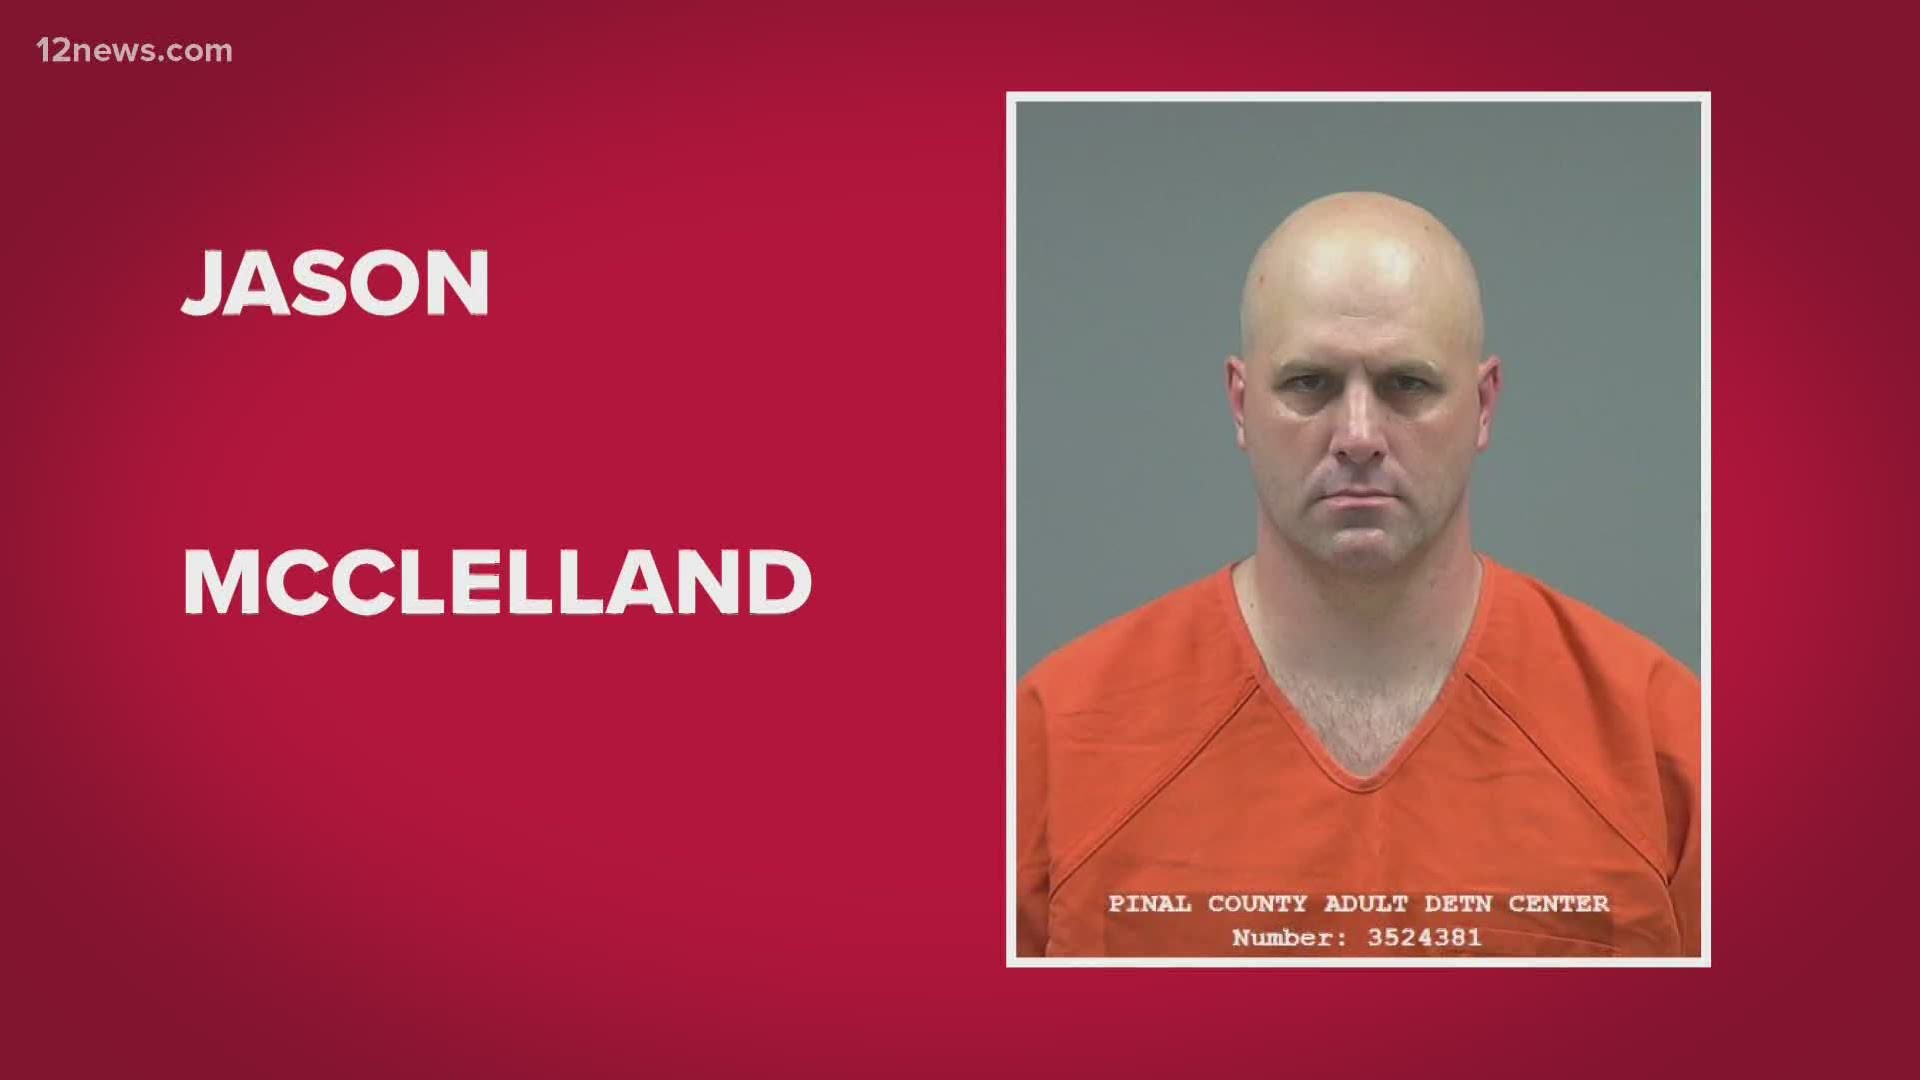 Jason McClelland was booked into jail following the collaborative effort of the ADPC and the Pinal County Attorney's Office, police said.